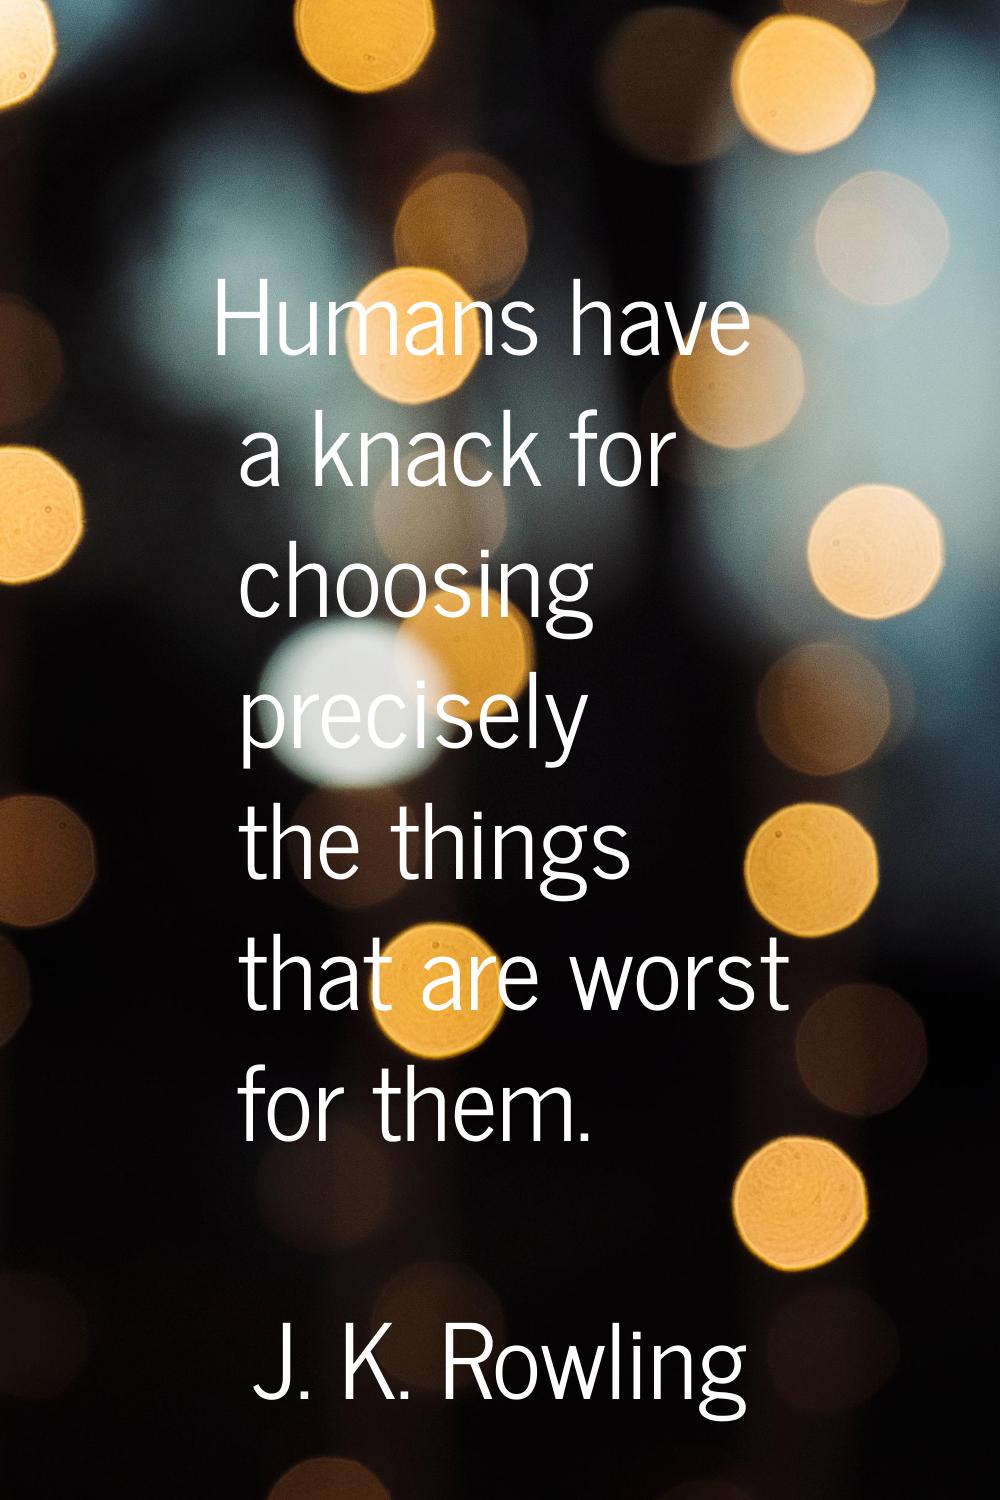 Humans have a knack for choosing precisely the things that are worst for them.